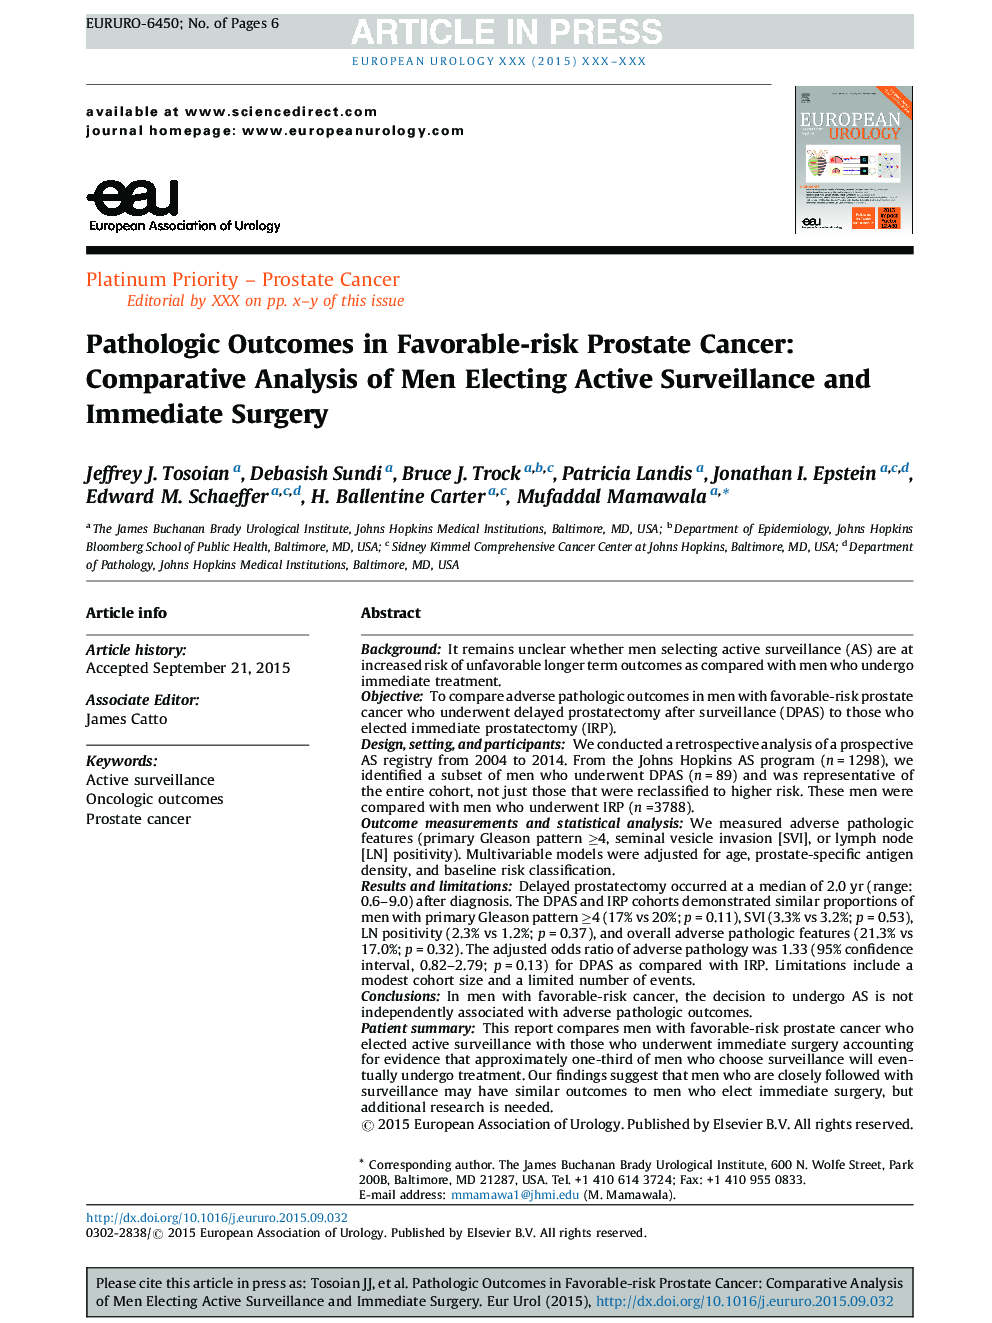 Pathologic Outcomes in Favorable-risk Prostate Cancer: Comparative Analysis of Men Electing Active Surveillance and Immediate Surgery